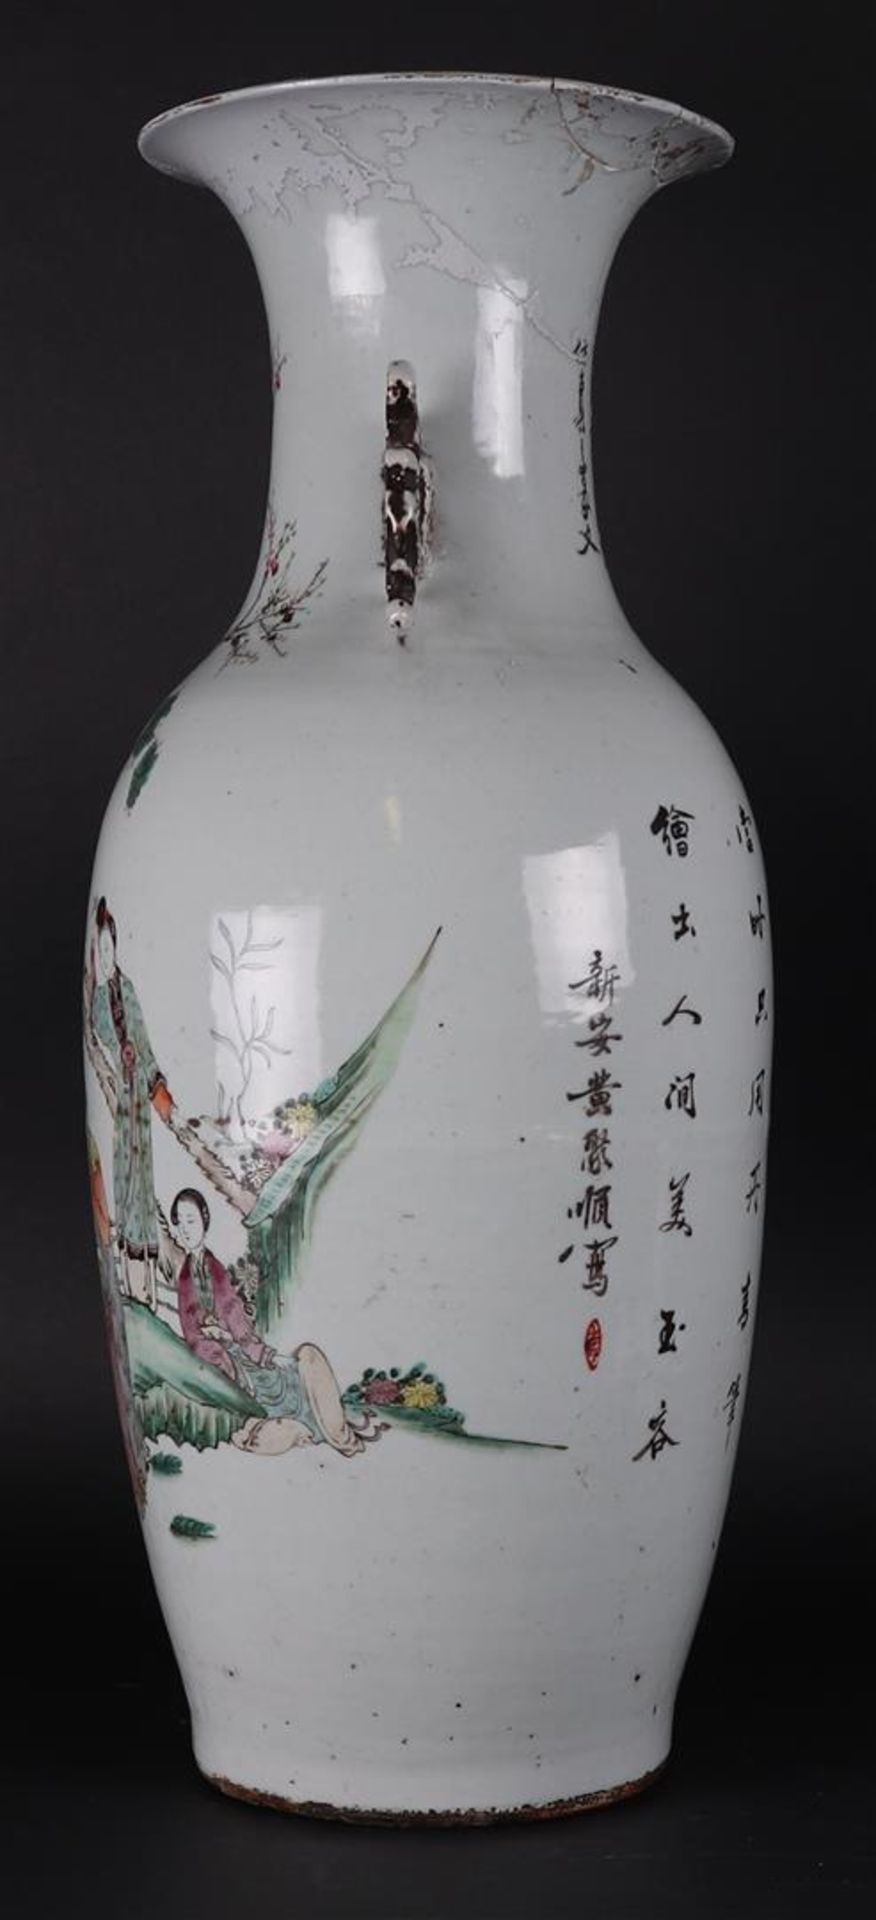 A porcelain Famille Rose vase decorated with various figures. China, 19th century. - Image 4 of 6